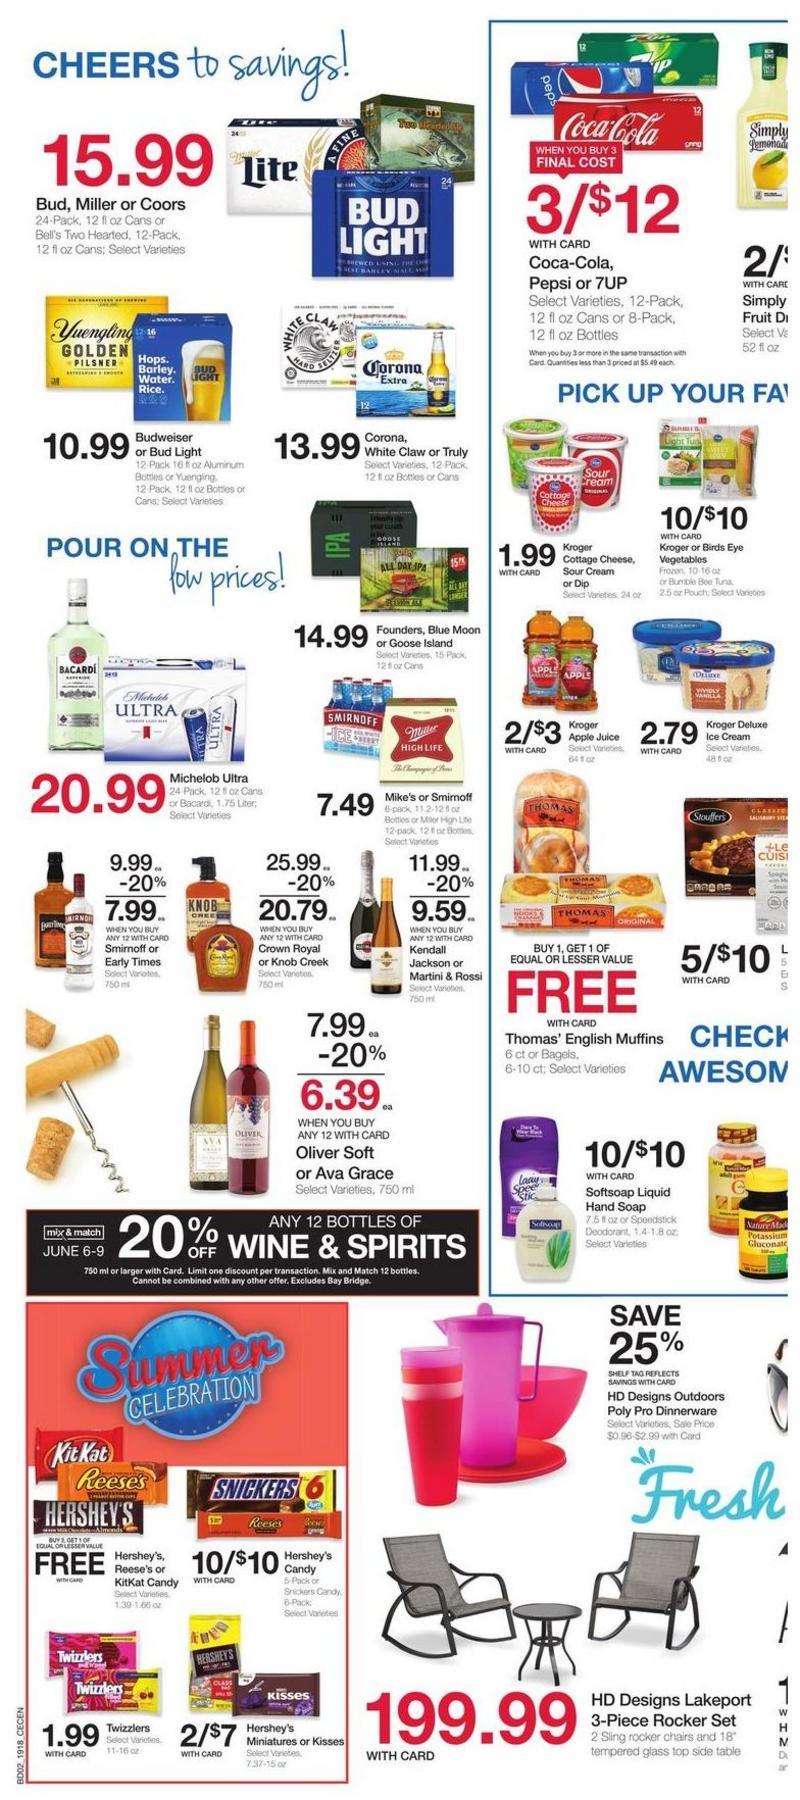 Kroger Weekly Ad from June 5